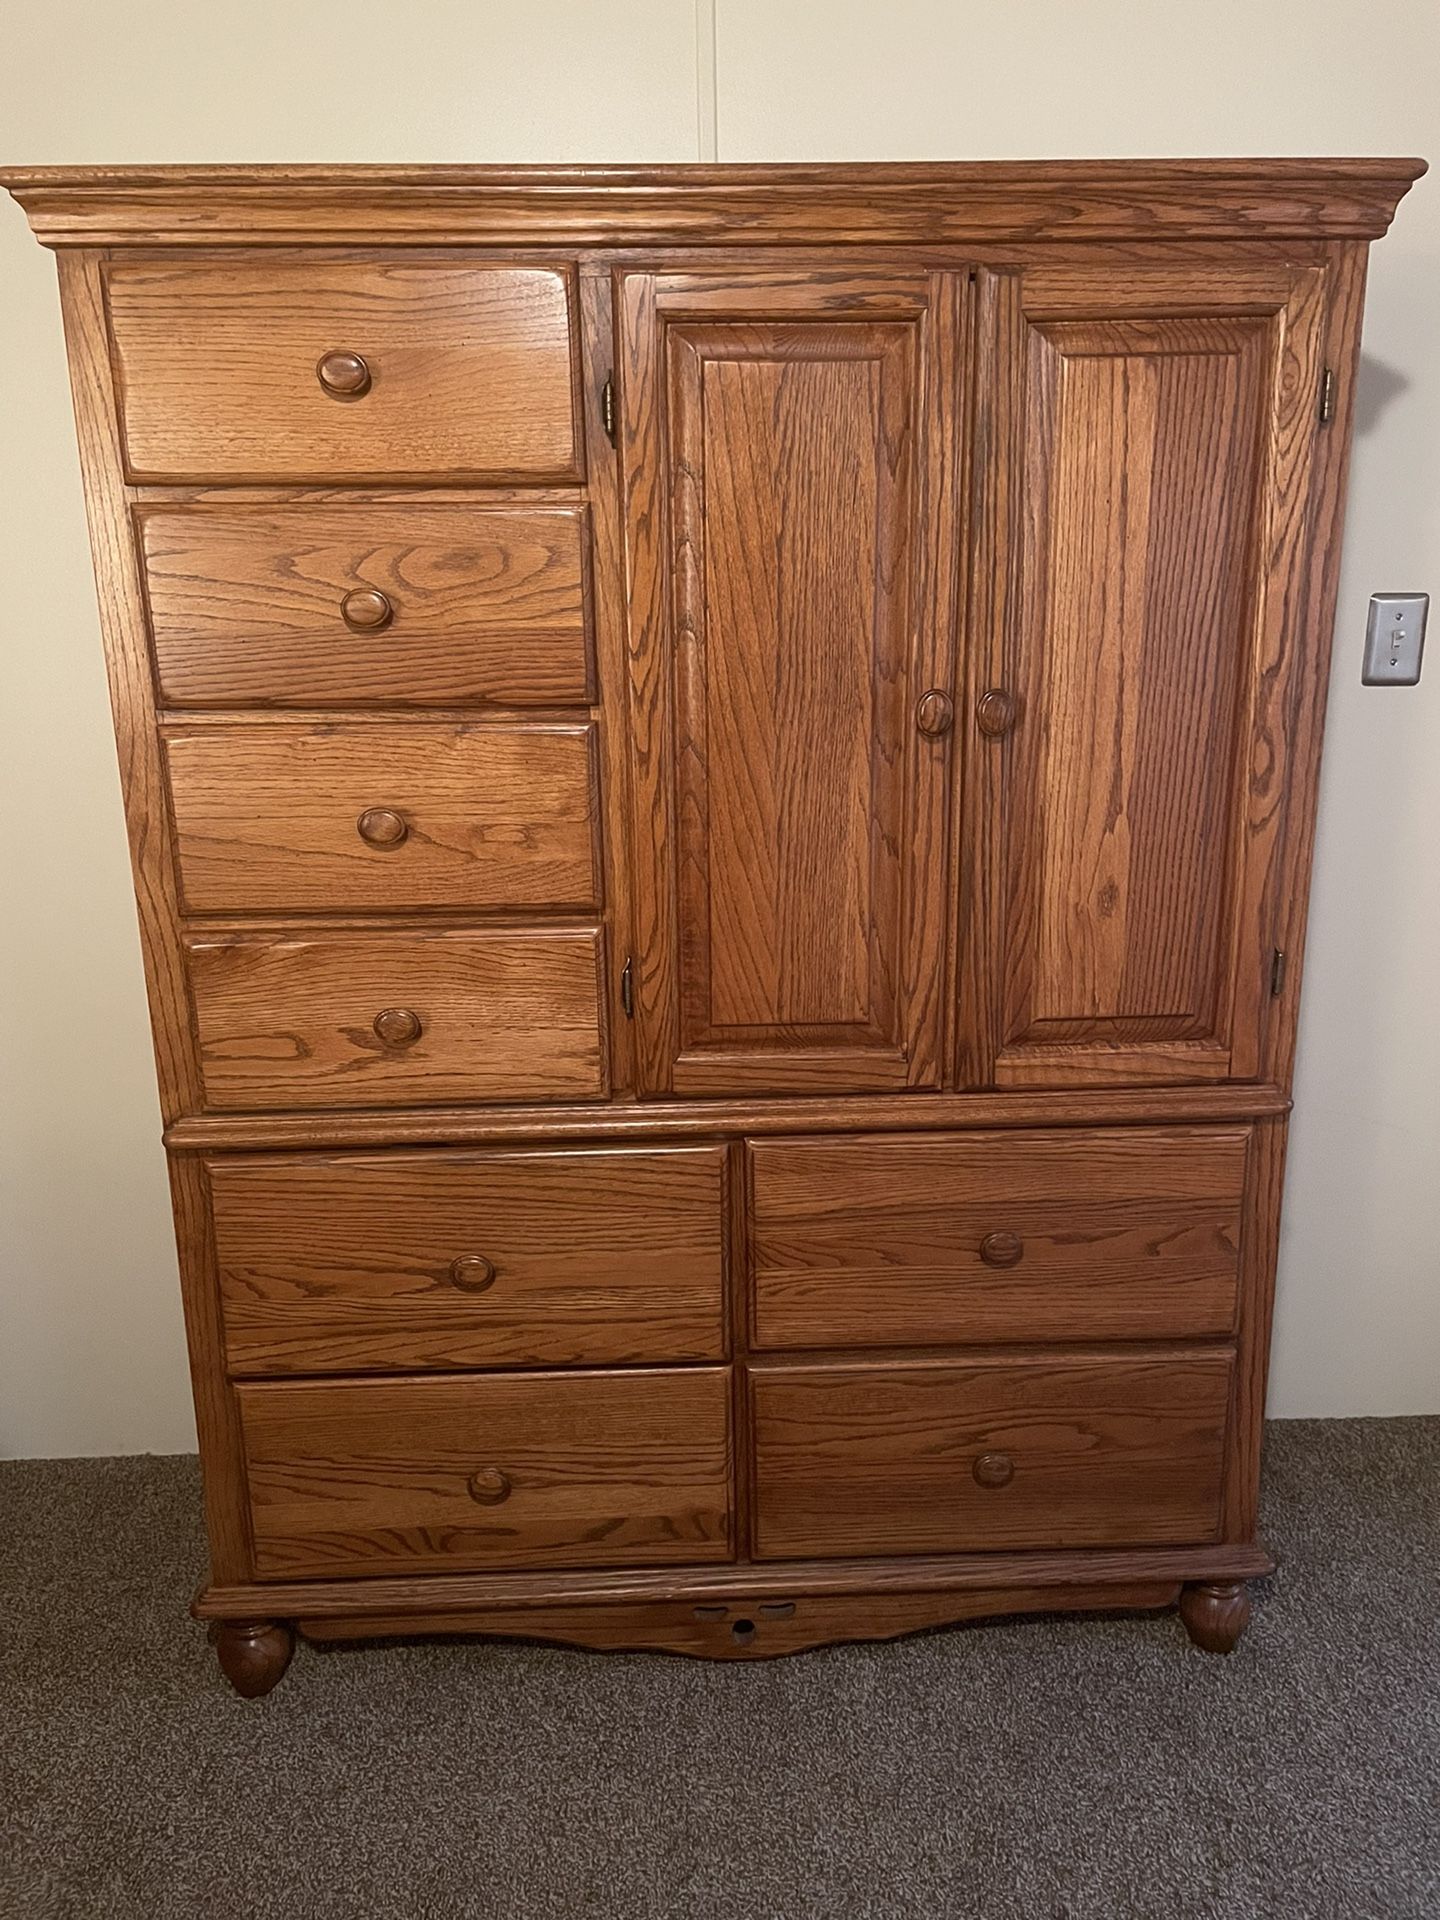 Pending Sale- Solid Oak 8 Drawer Armoire - Perfect Condition 